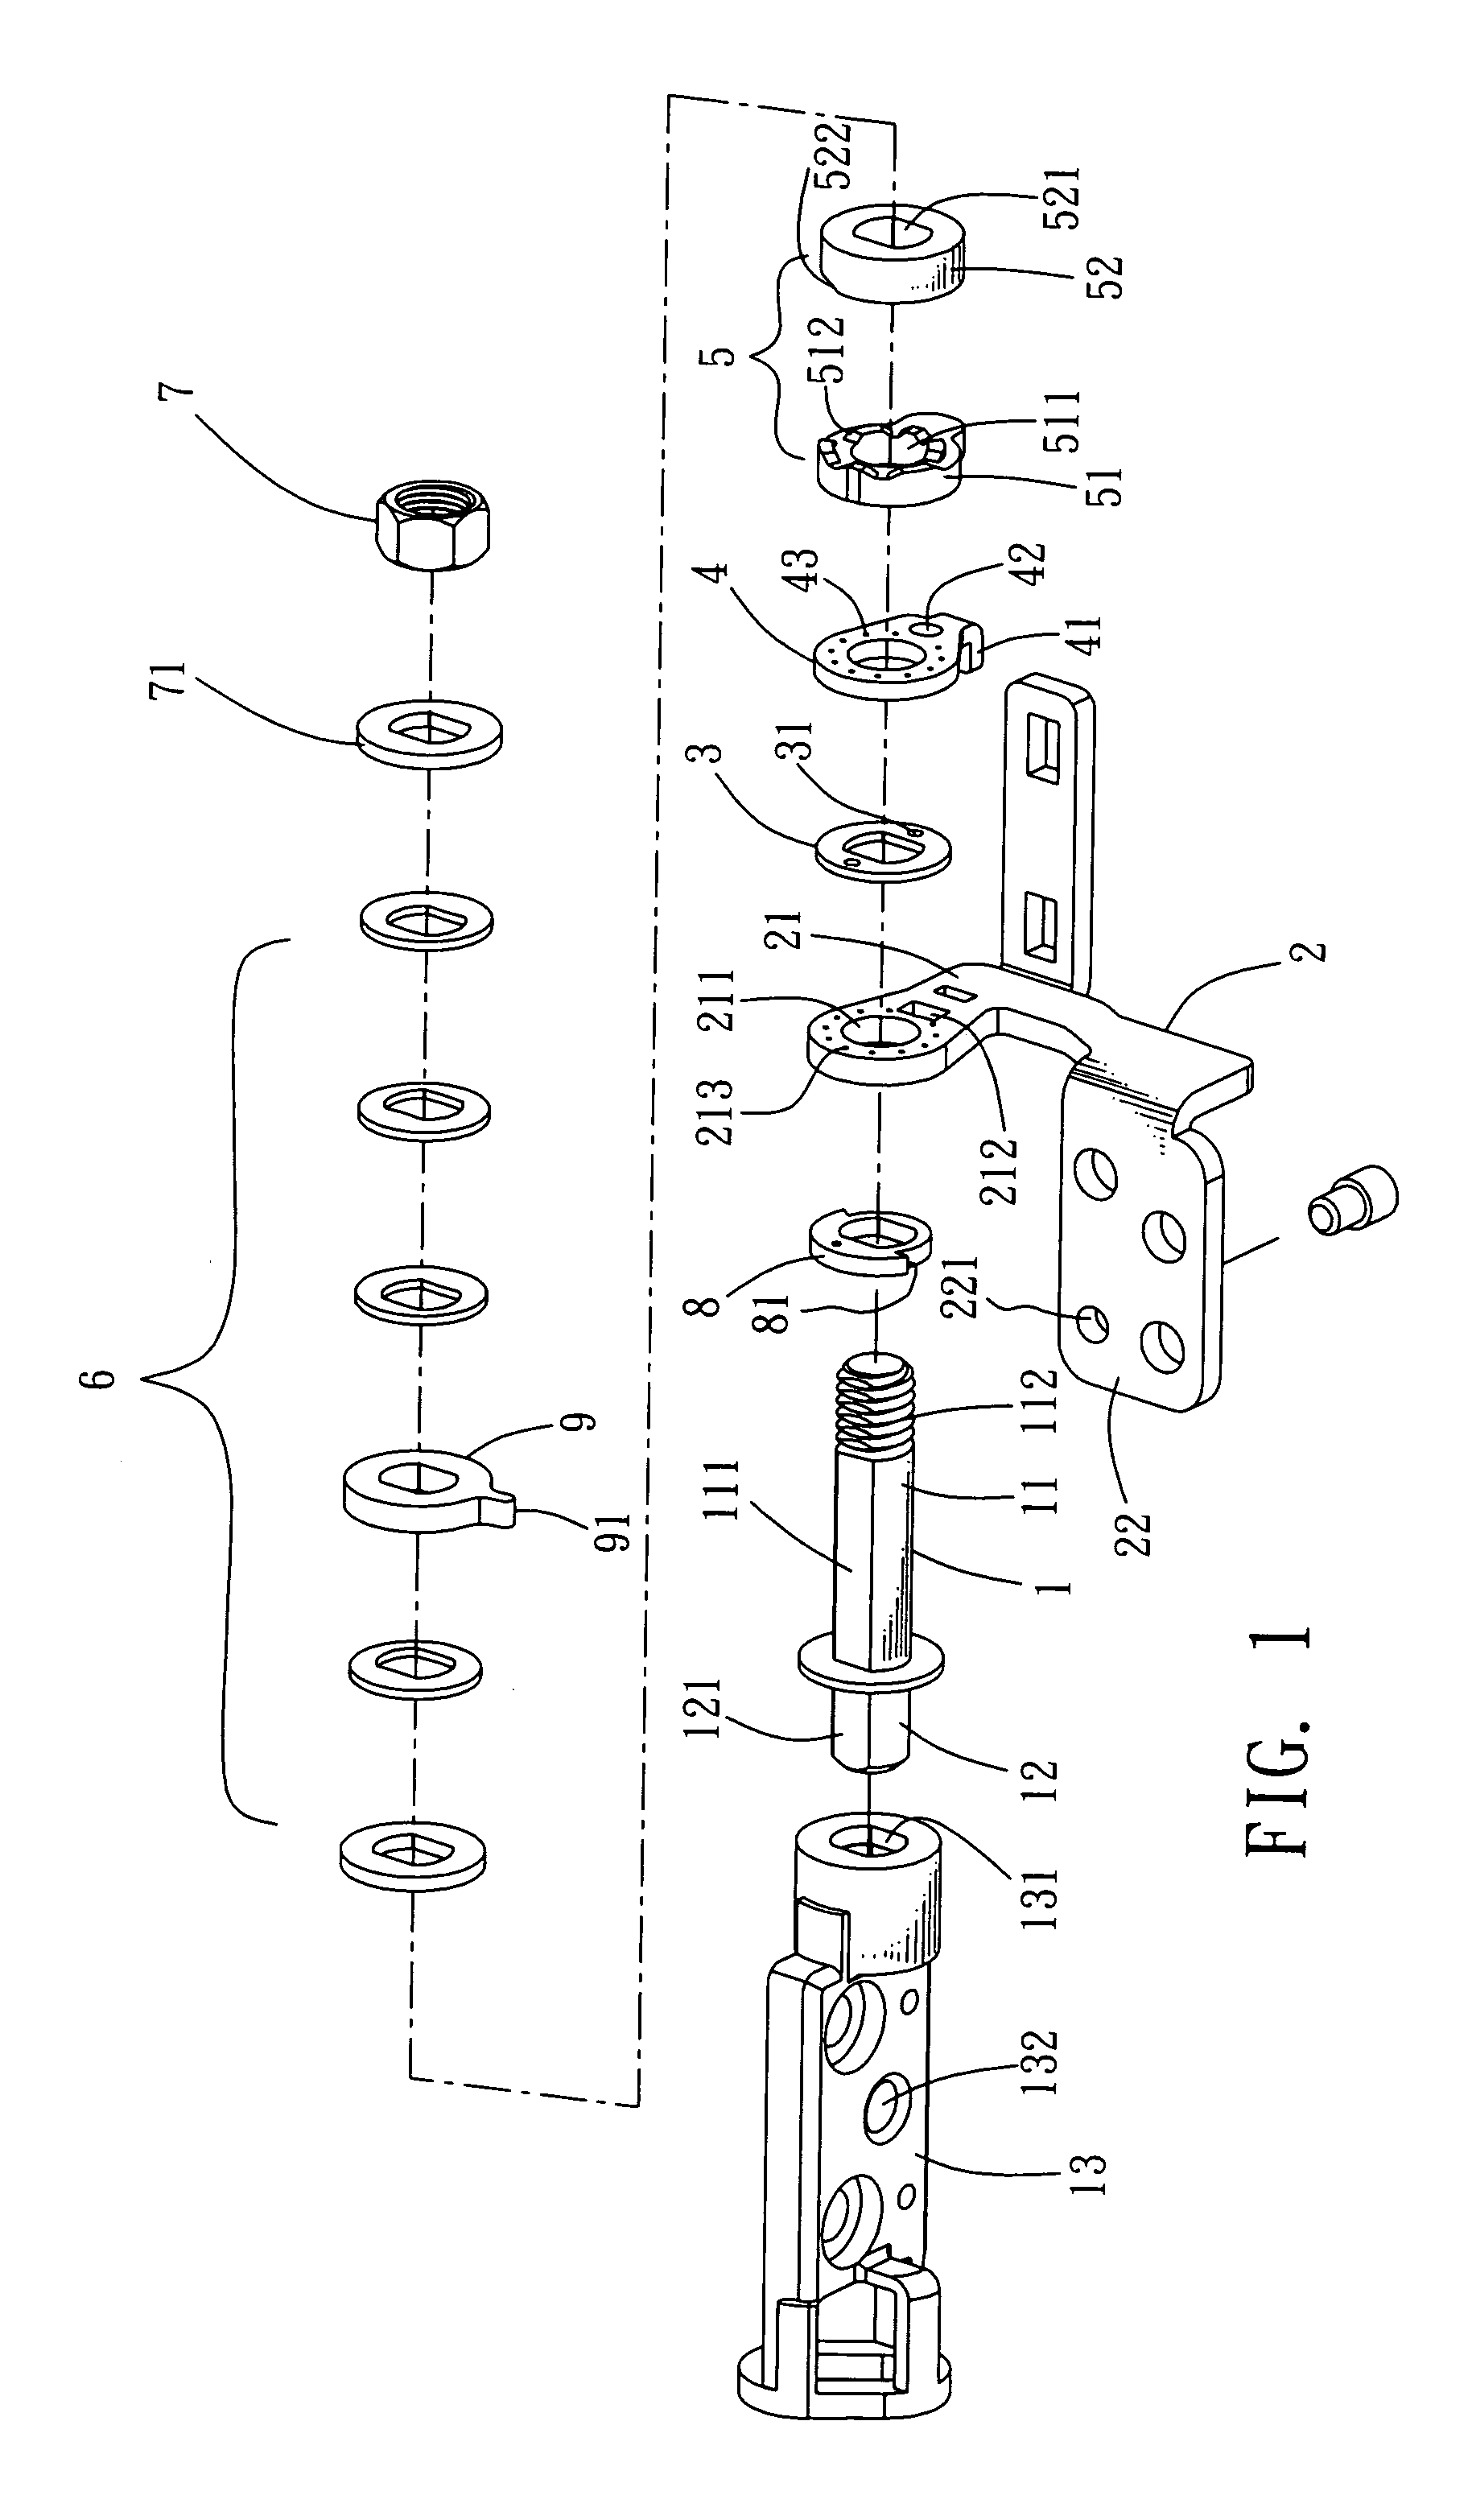 Rotating shaft structure with automatic locking mechanism